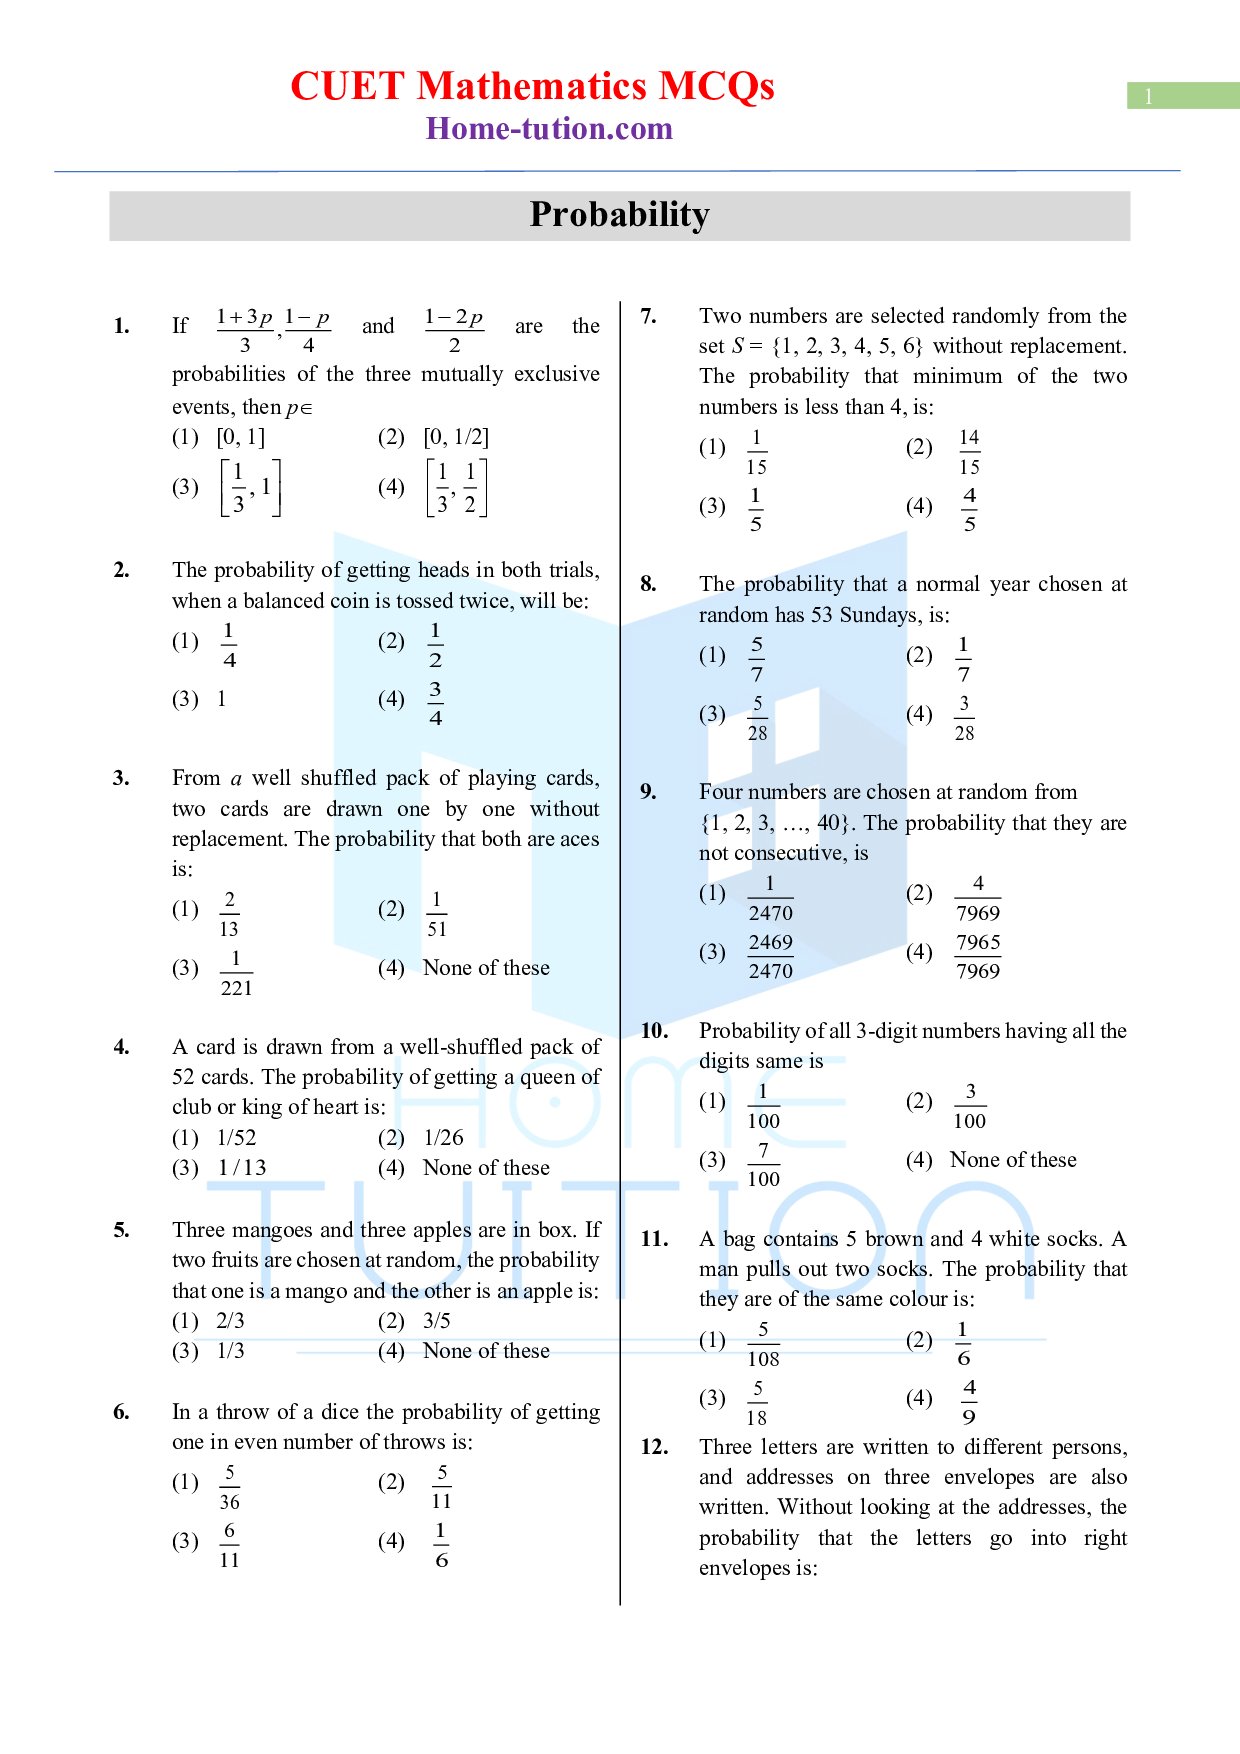 CUET MCQ Questions For Maths Chapter-12 Probability